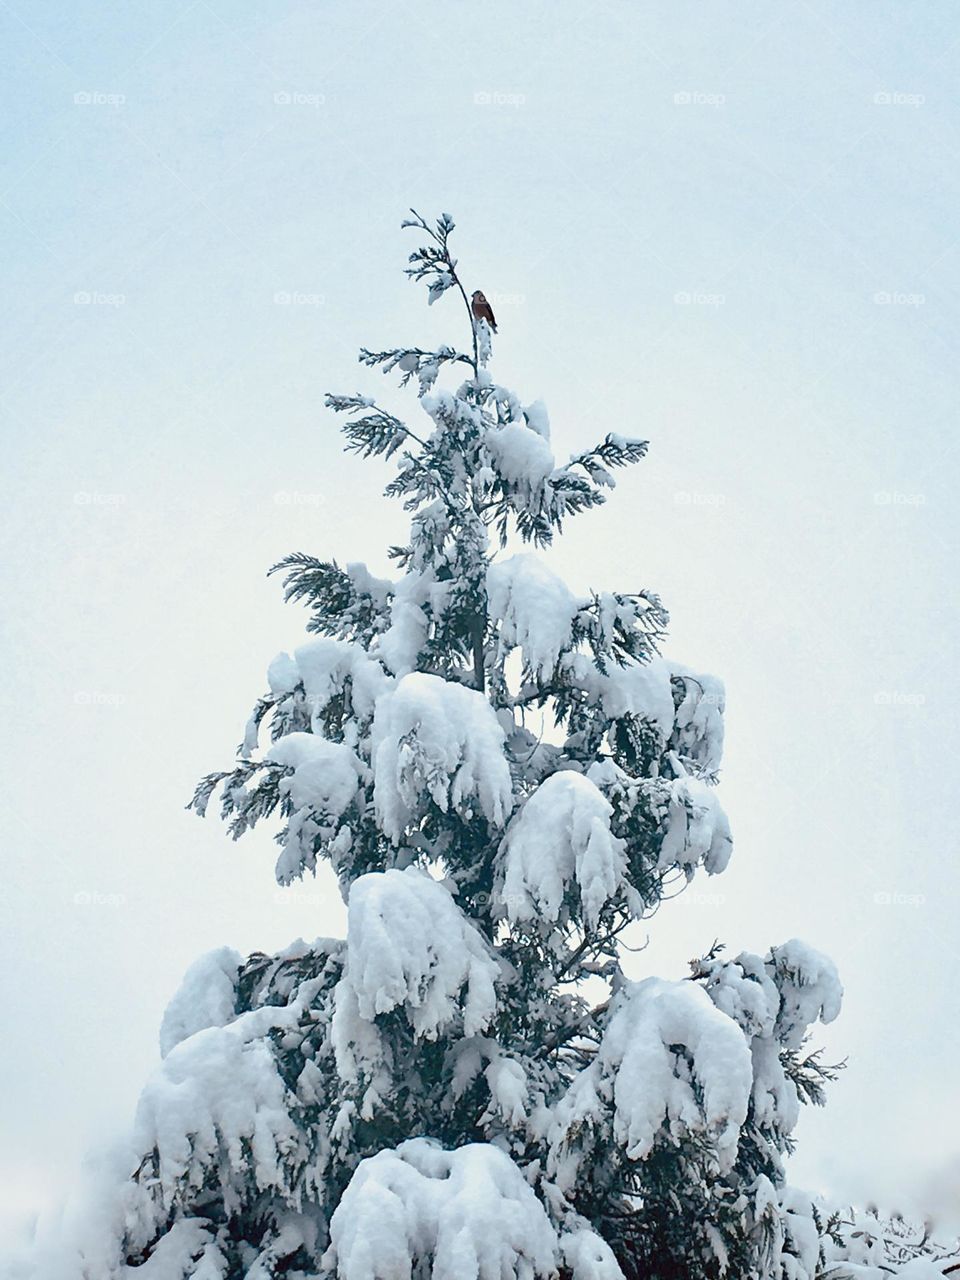 Little bird on top of a fir tree covered in snow